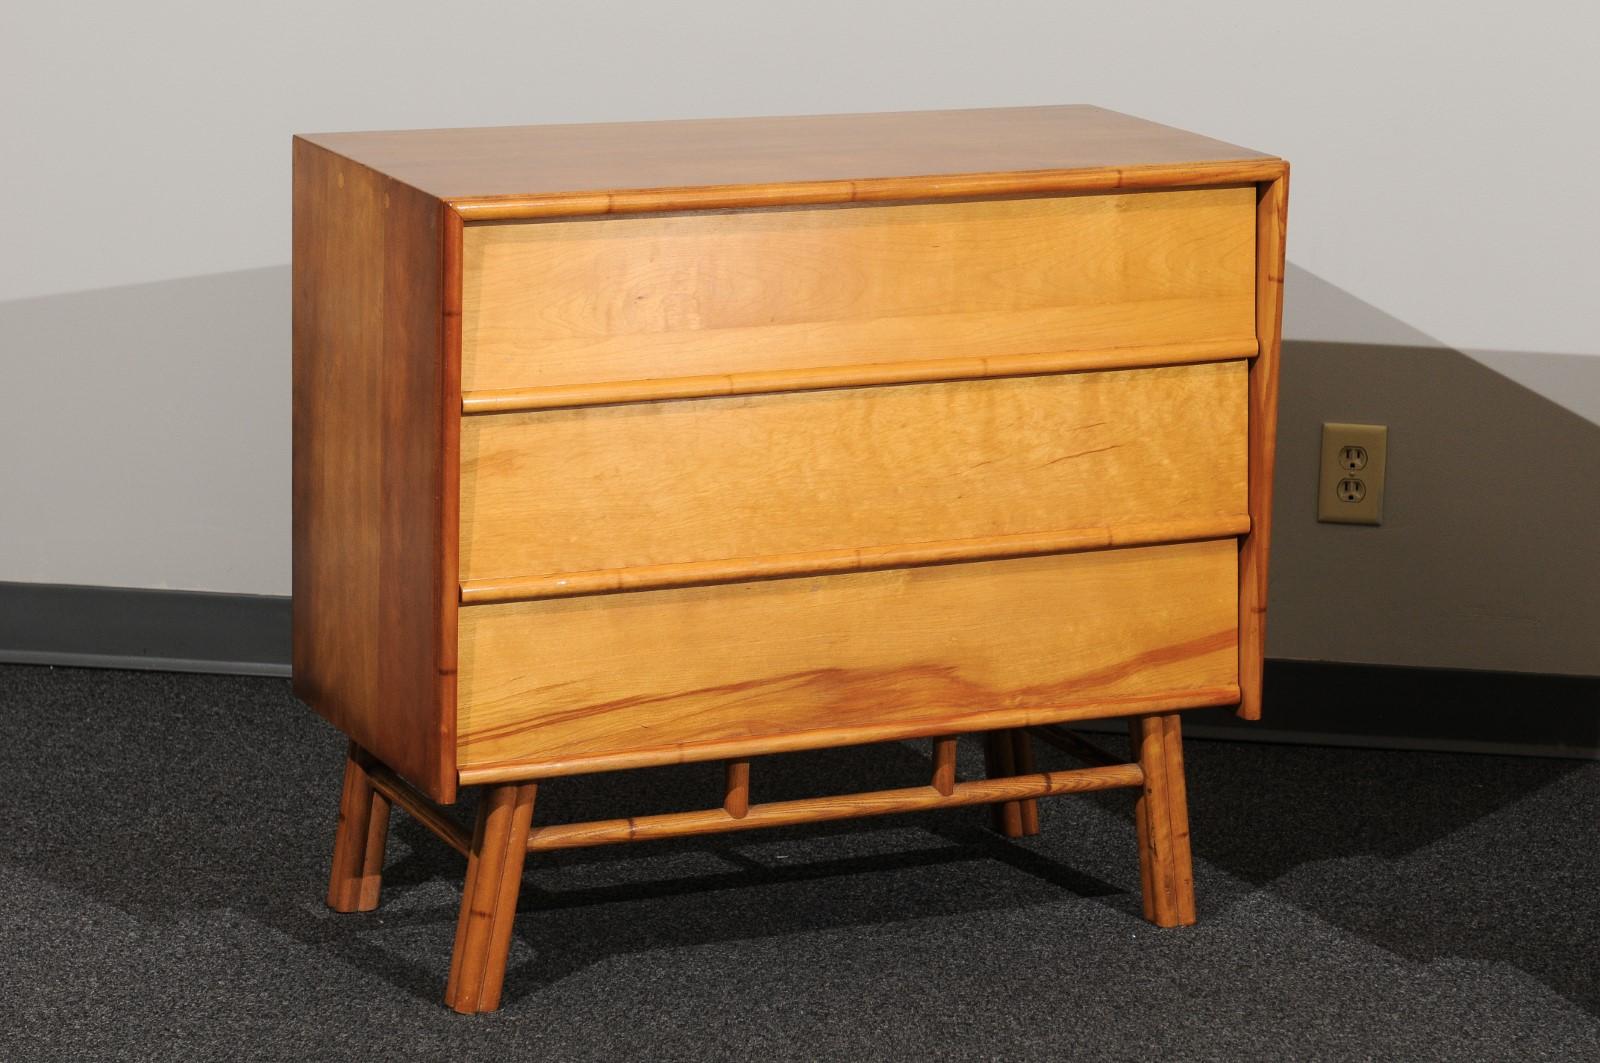 Elegant Restored Pair of Modern Maple Chests by John Stuart, circa 1950 In Excellent Condition For Sale In Atlanta, GA